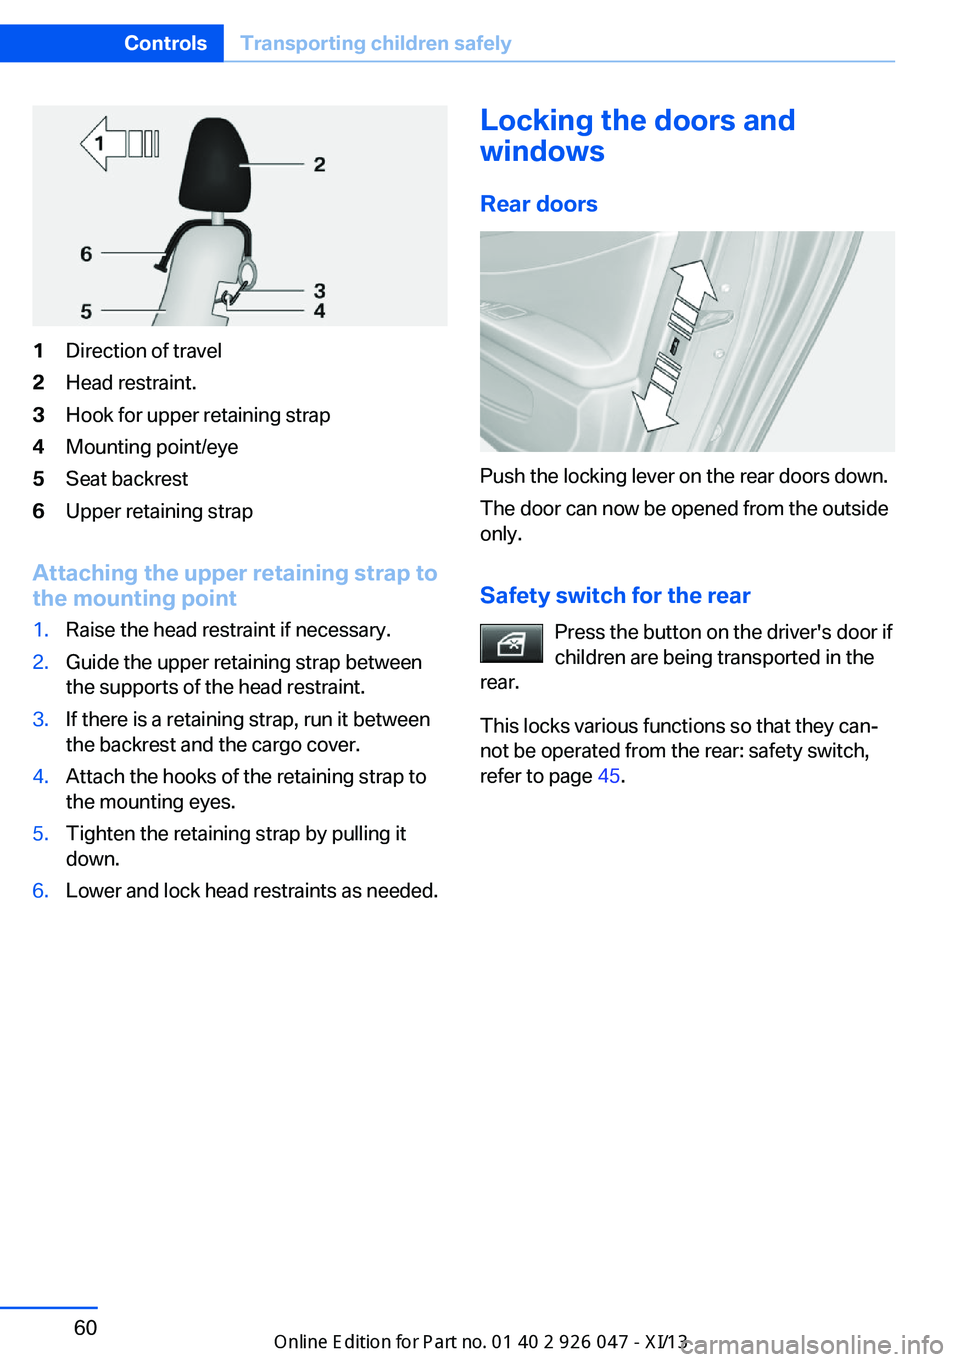 BMW X3 2013 F25 Owners Manual 1Direction of travel2Head restraint.3Hook for upper retaining strap4Mounting point/eye5Seat backrest6Upper retaining strap
Attaching the upper retaining strap to
the mounting point
1.Raise the head re